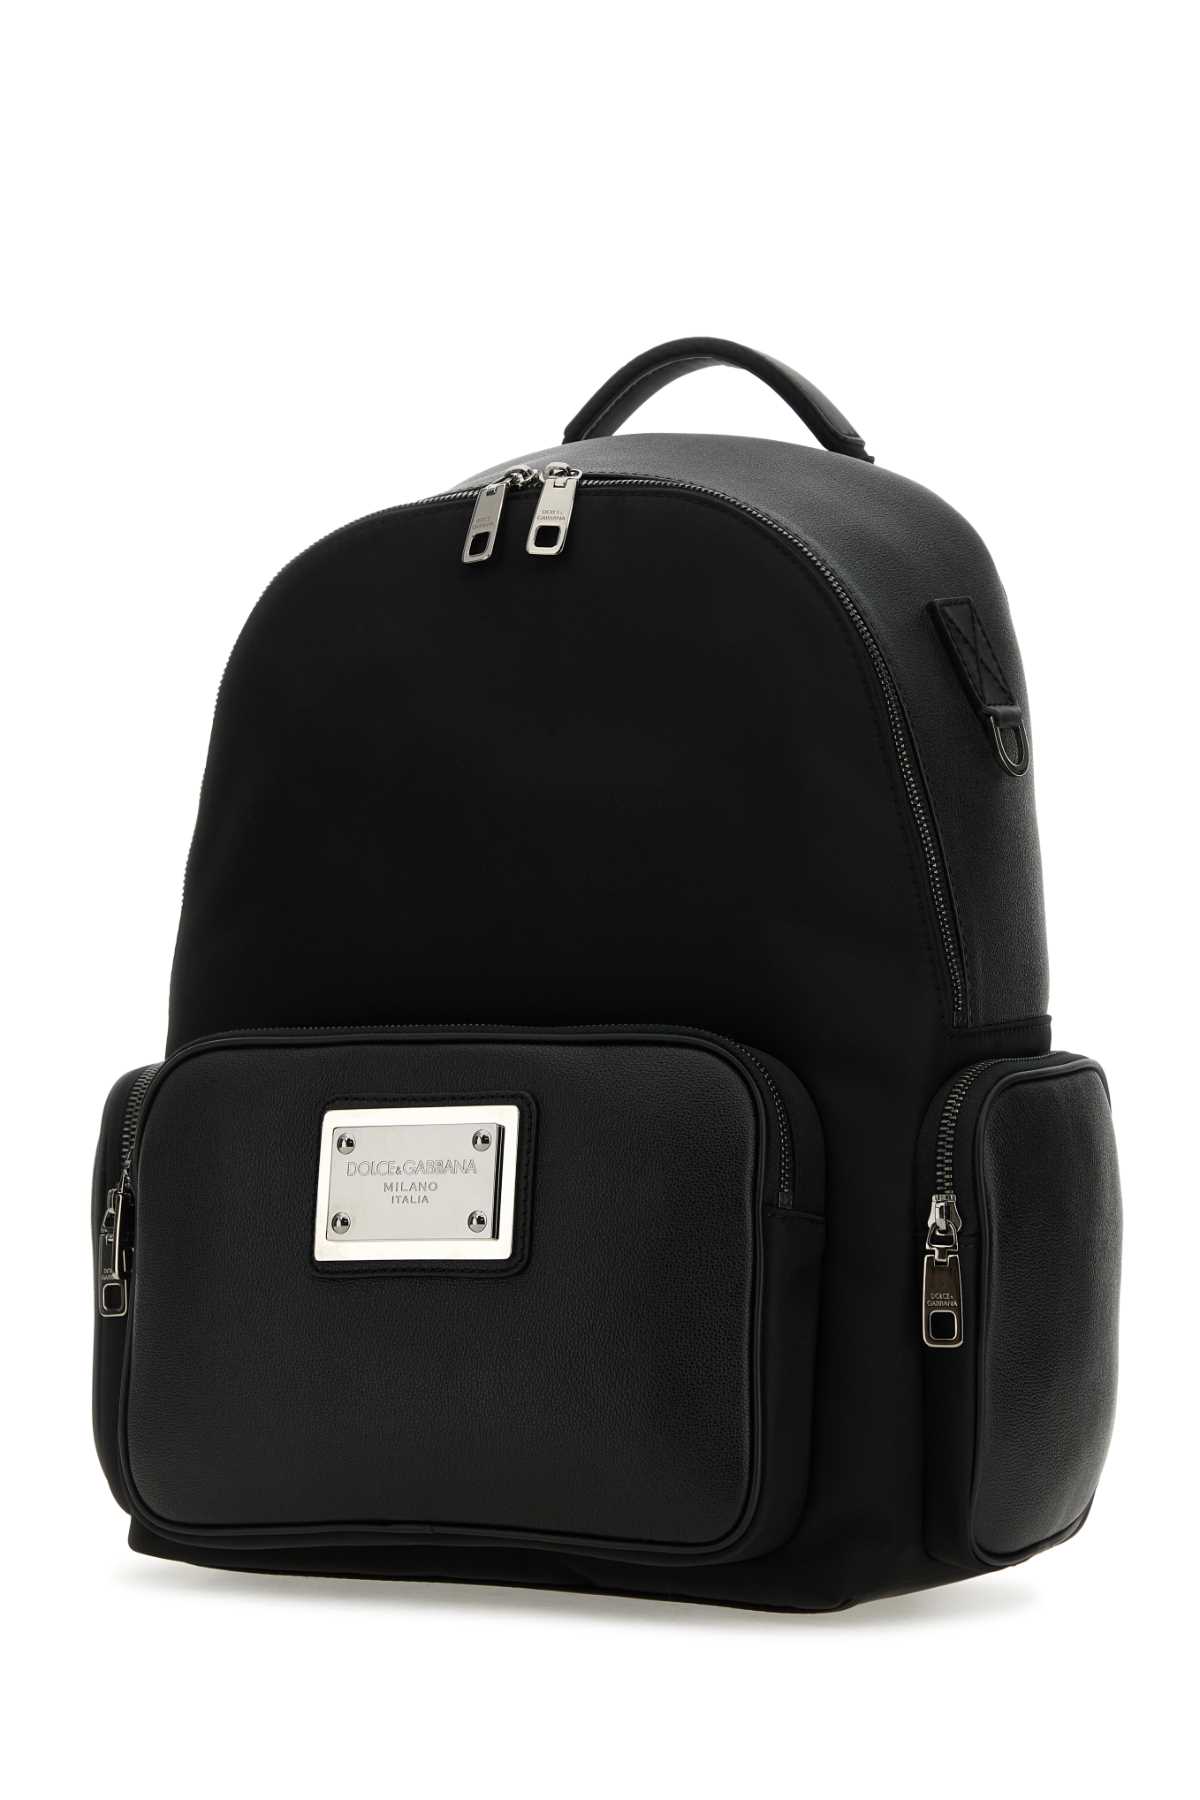 Dolce & Gabbana Black Fabric And Leather Backpack